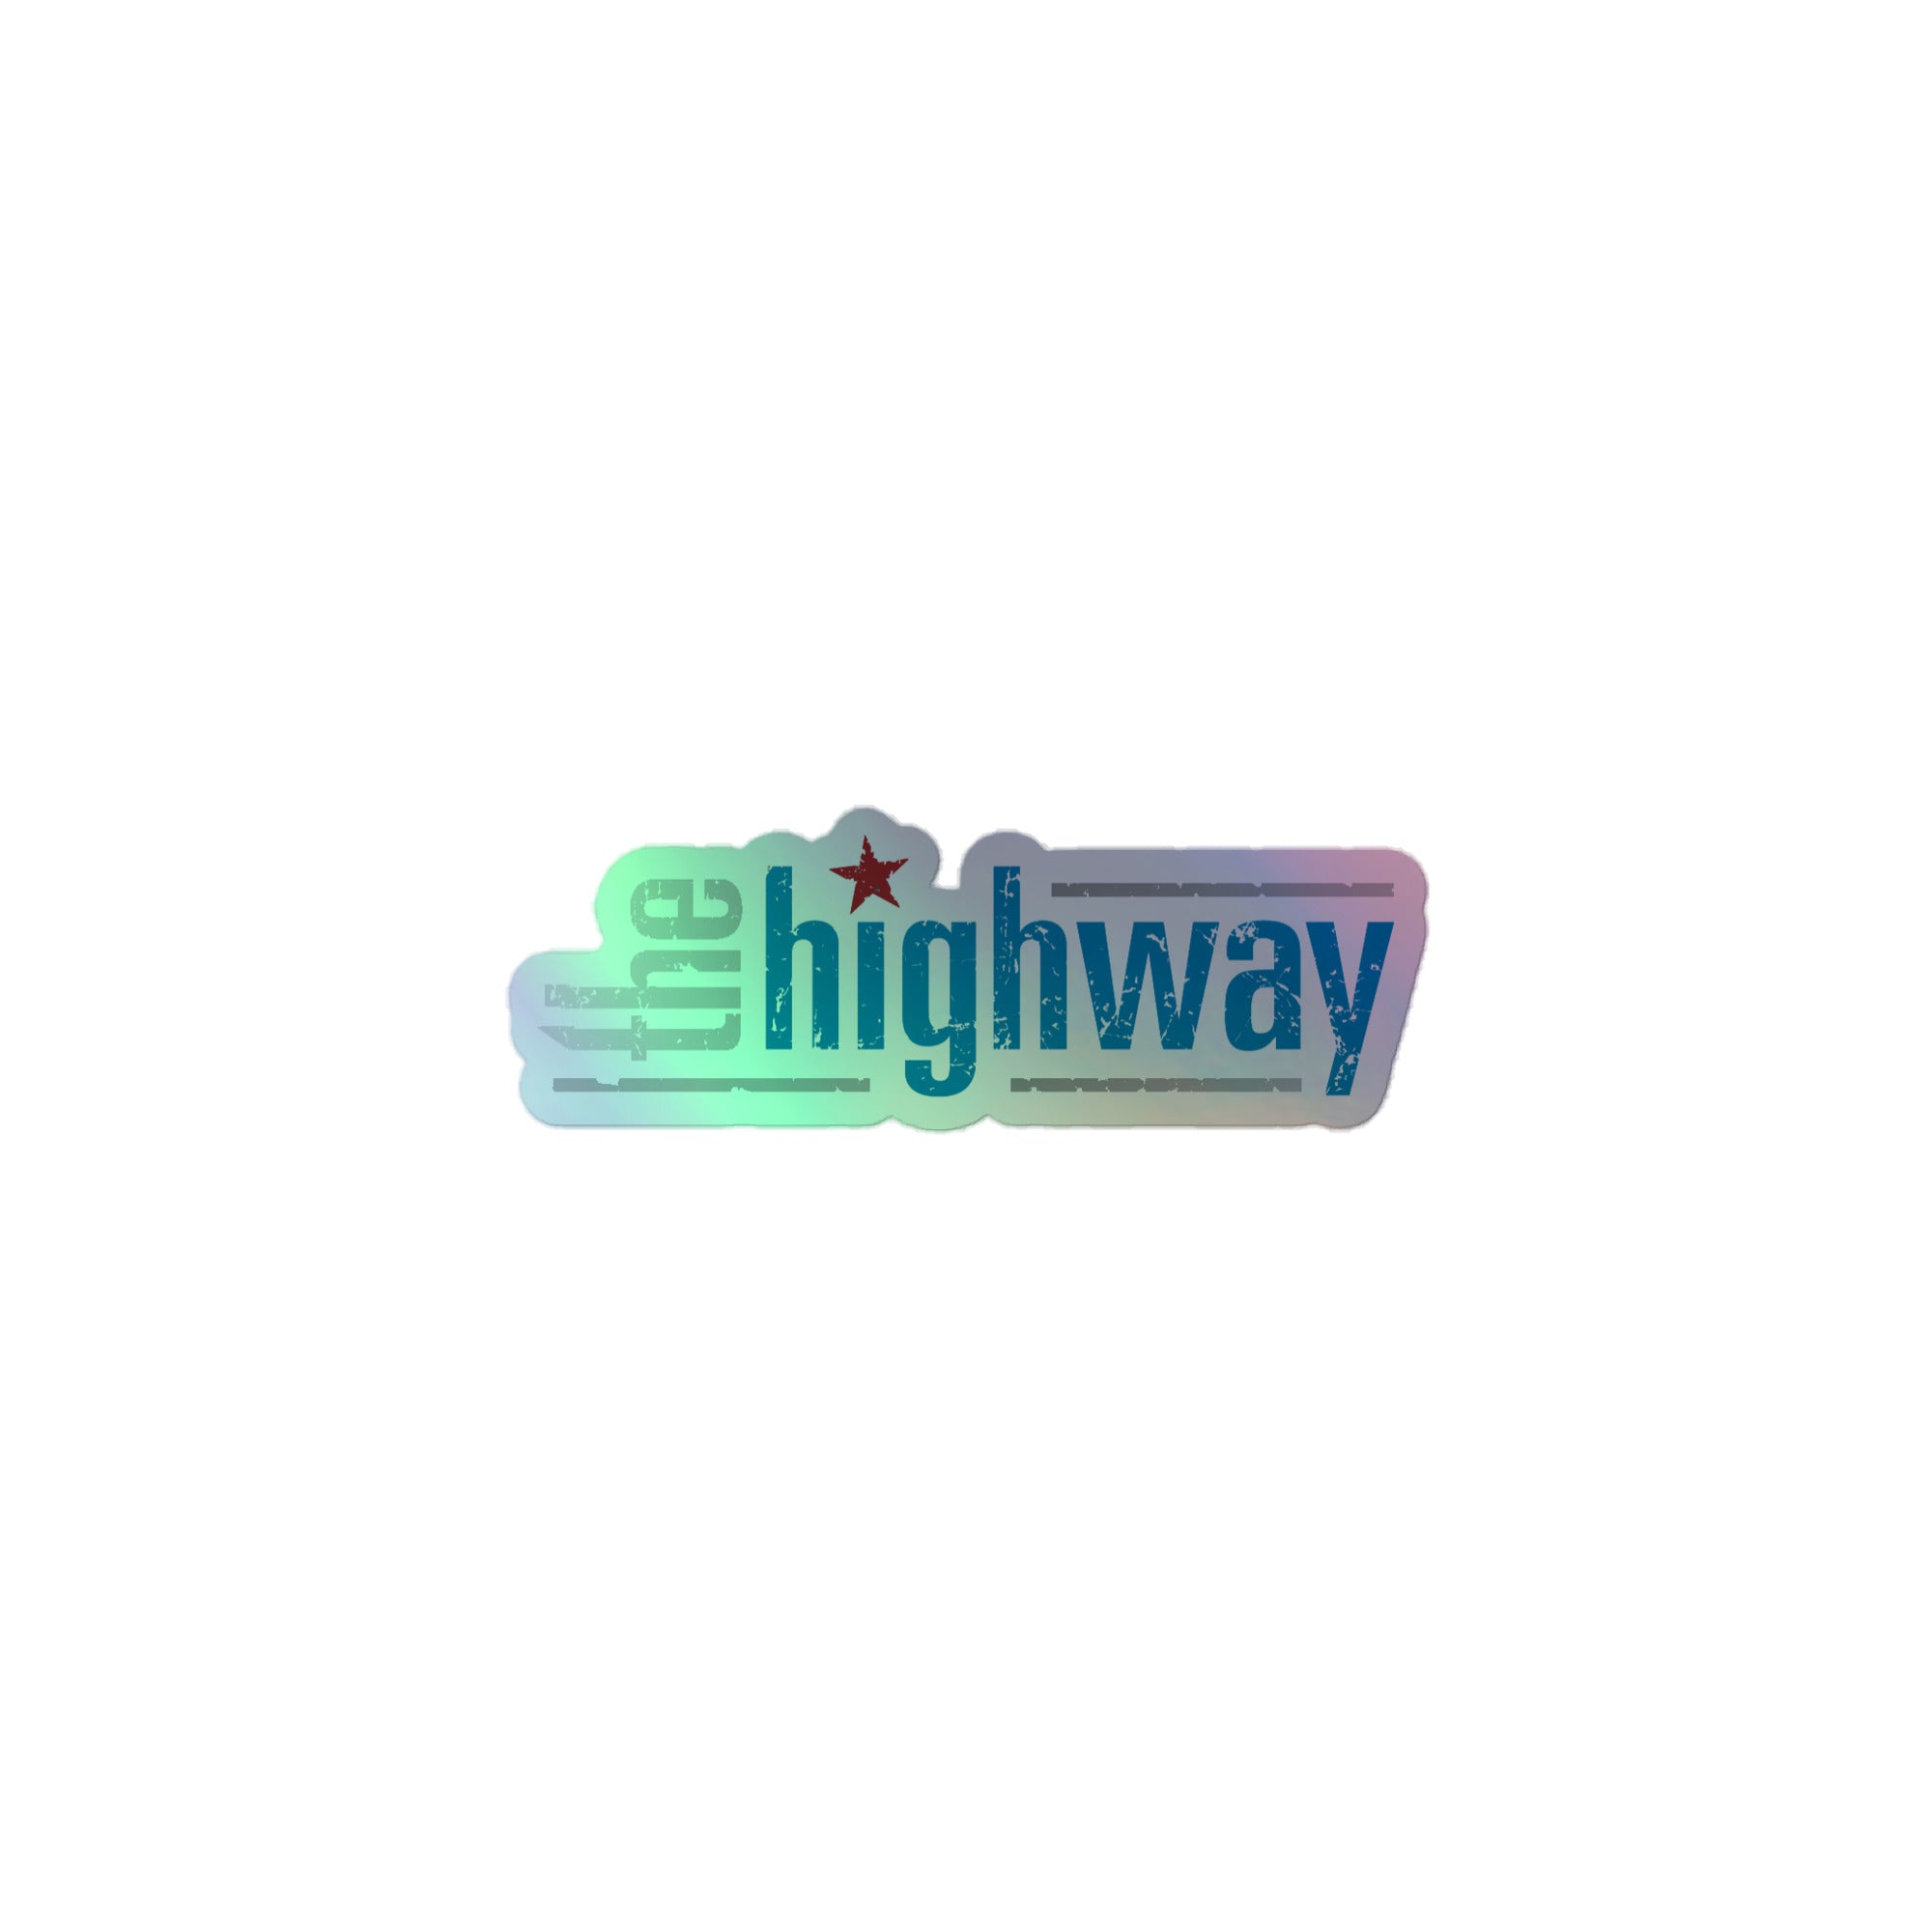 The Highway: Holographic Sticker